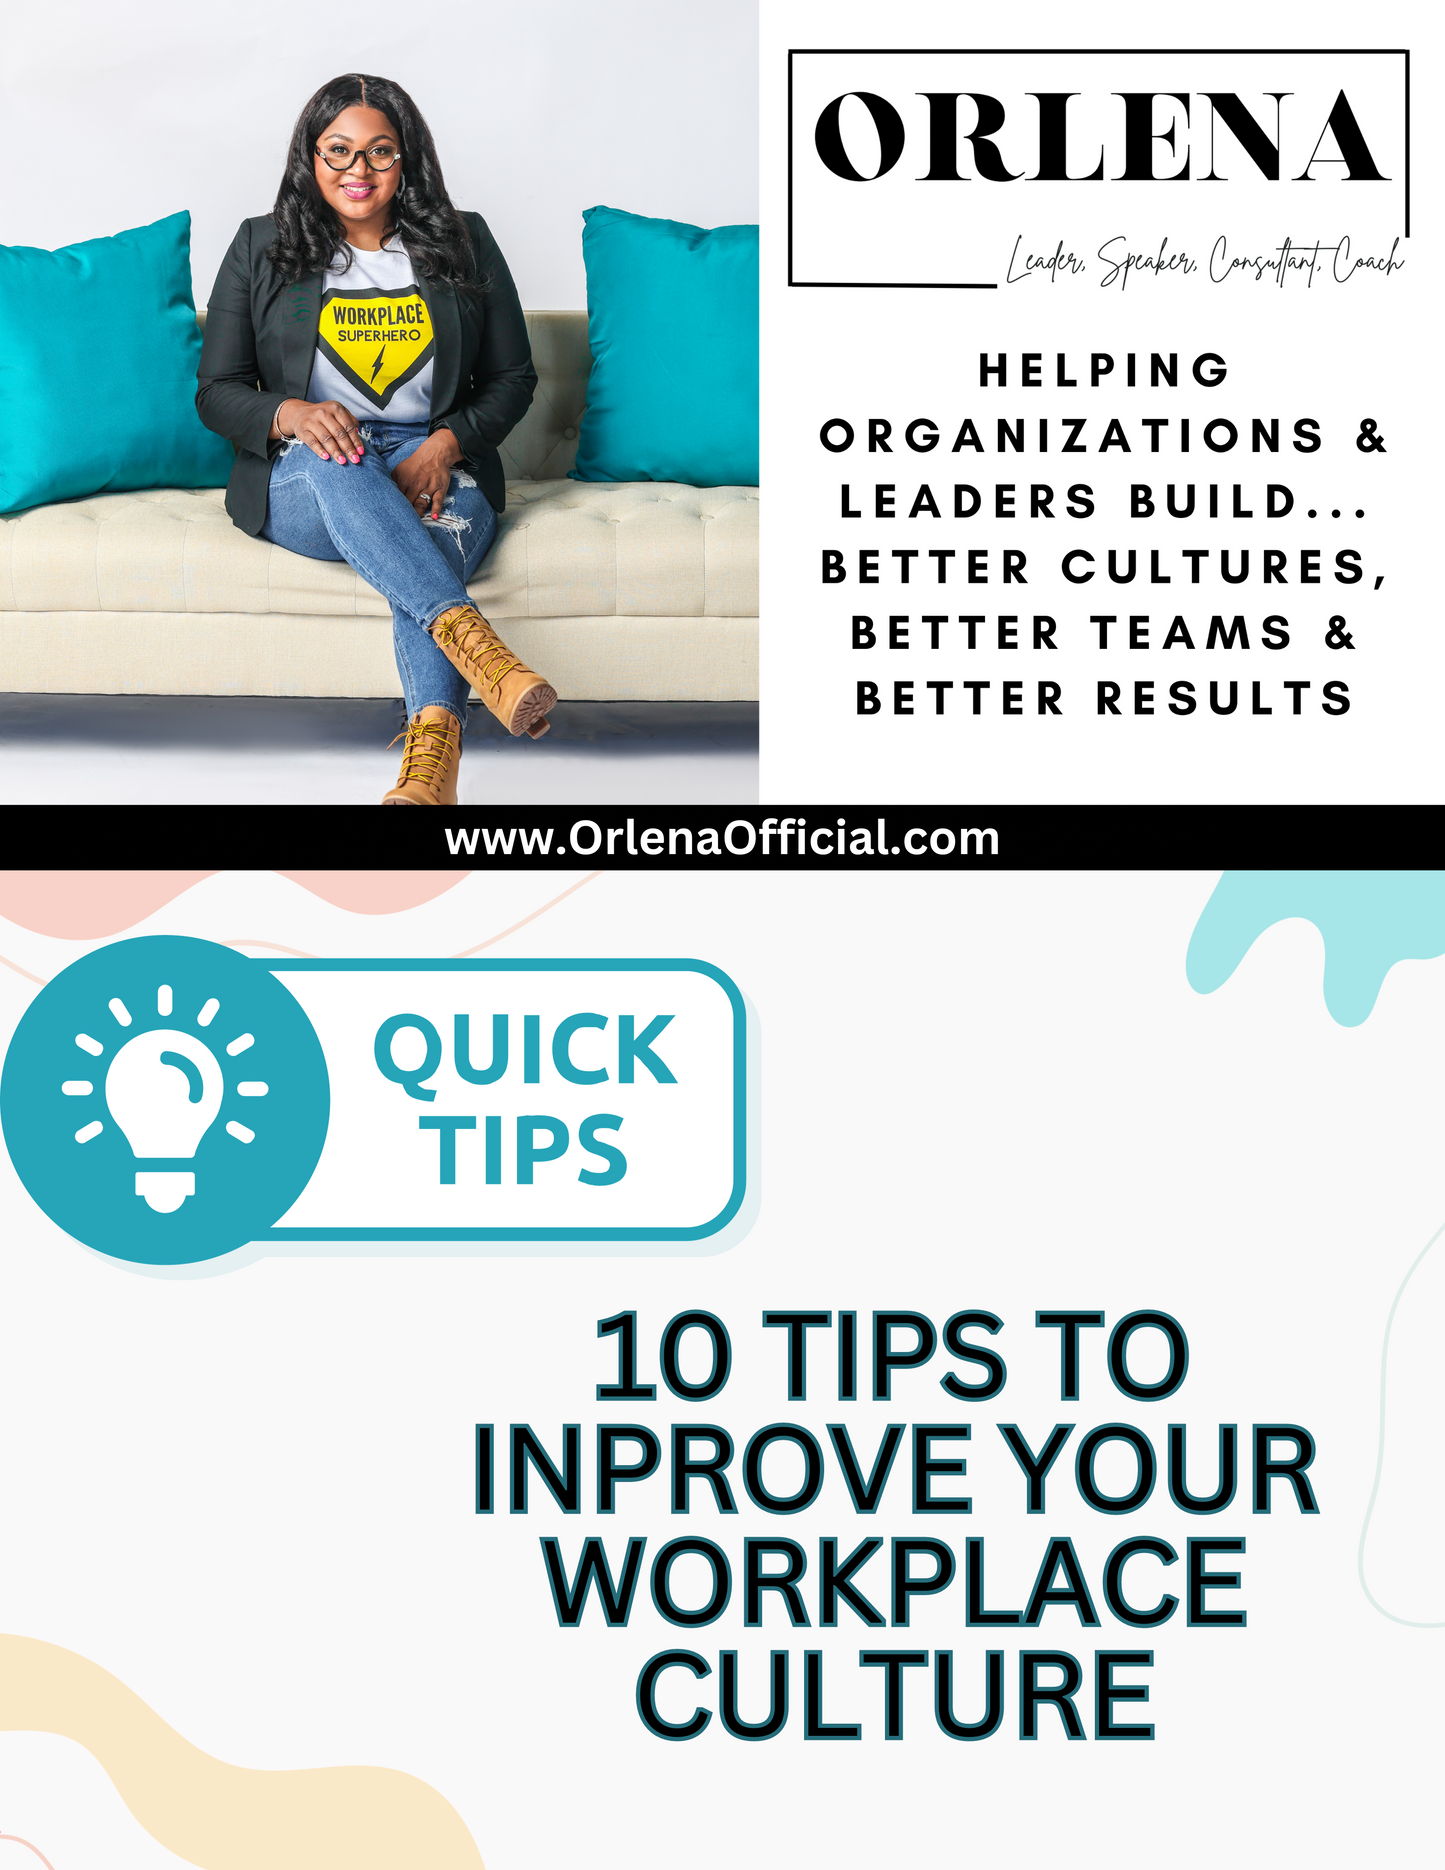 Download "10 Tips to Improve Your Workplace Culture" By Orlena Official